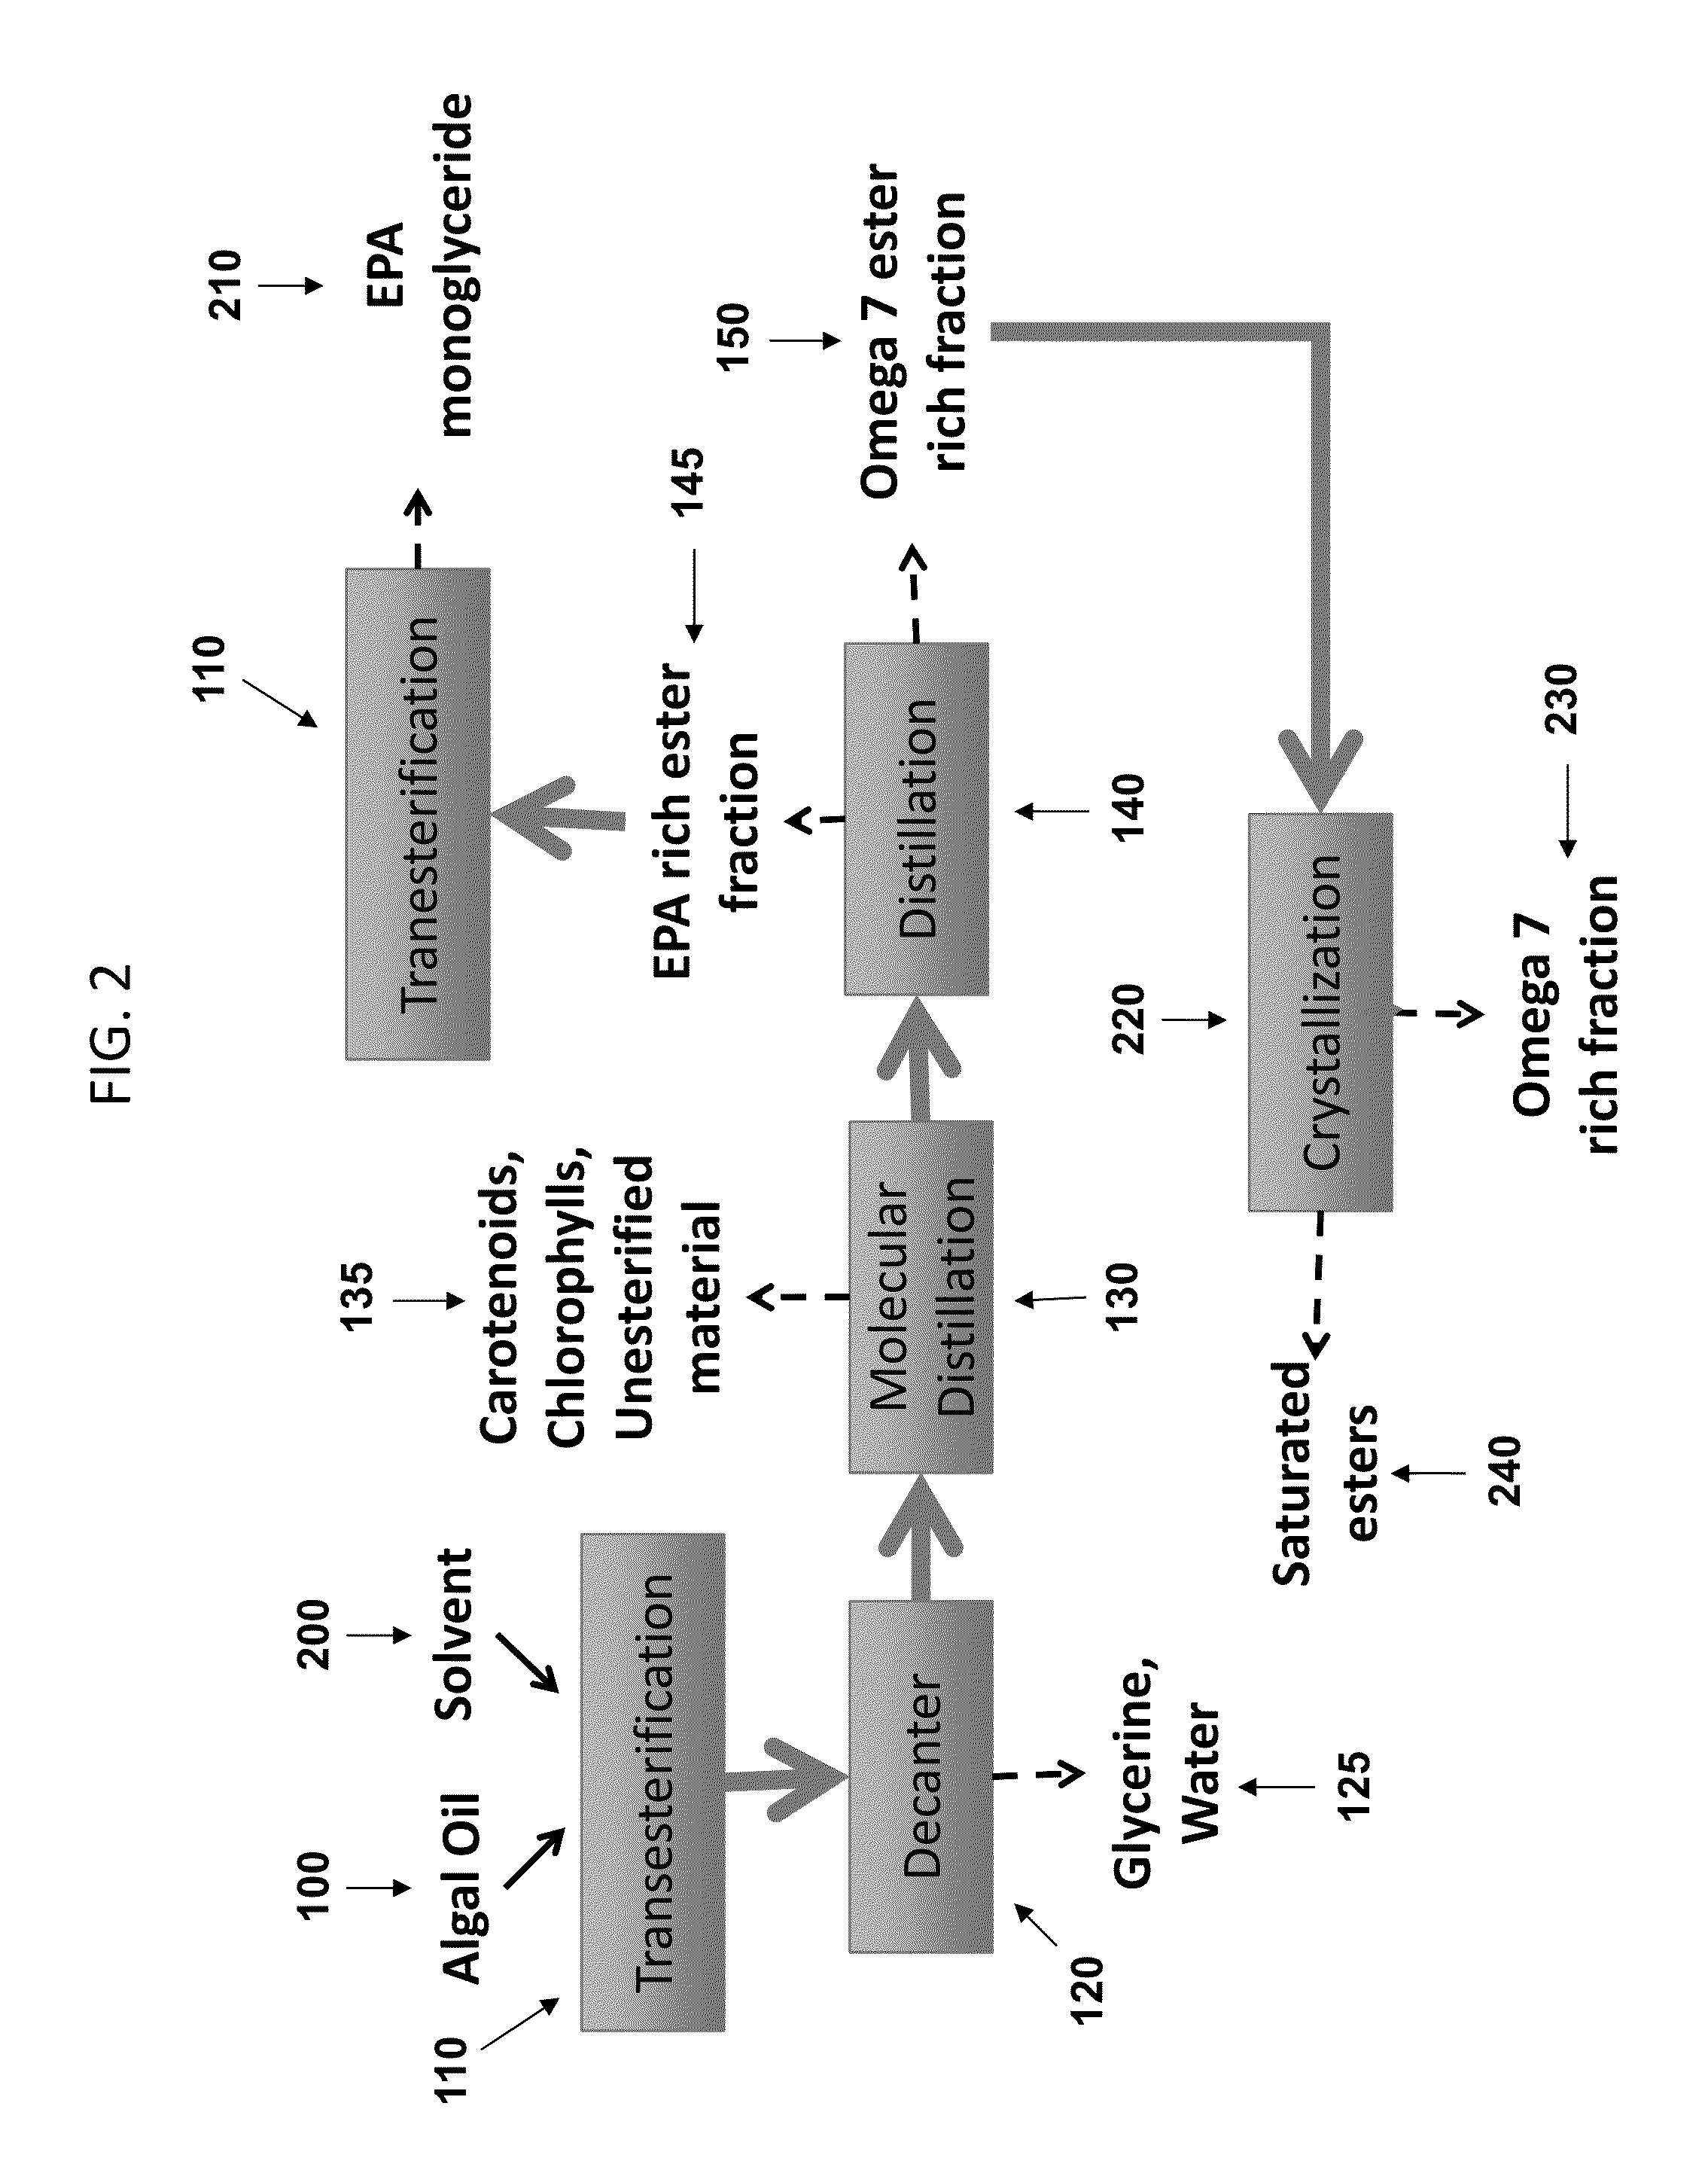 Omega 7 rich compositions and methods of isolating omega 7 fatty acids